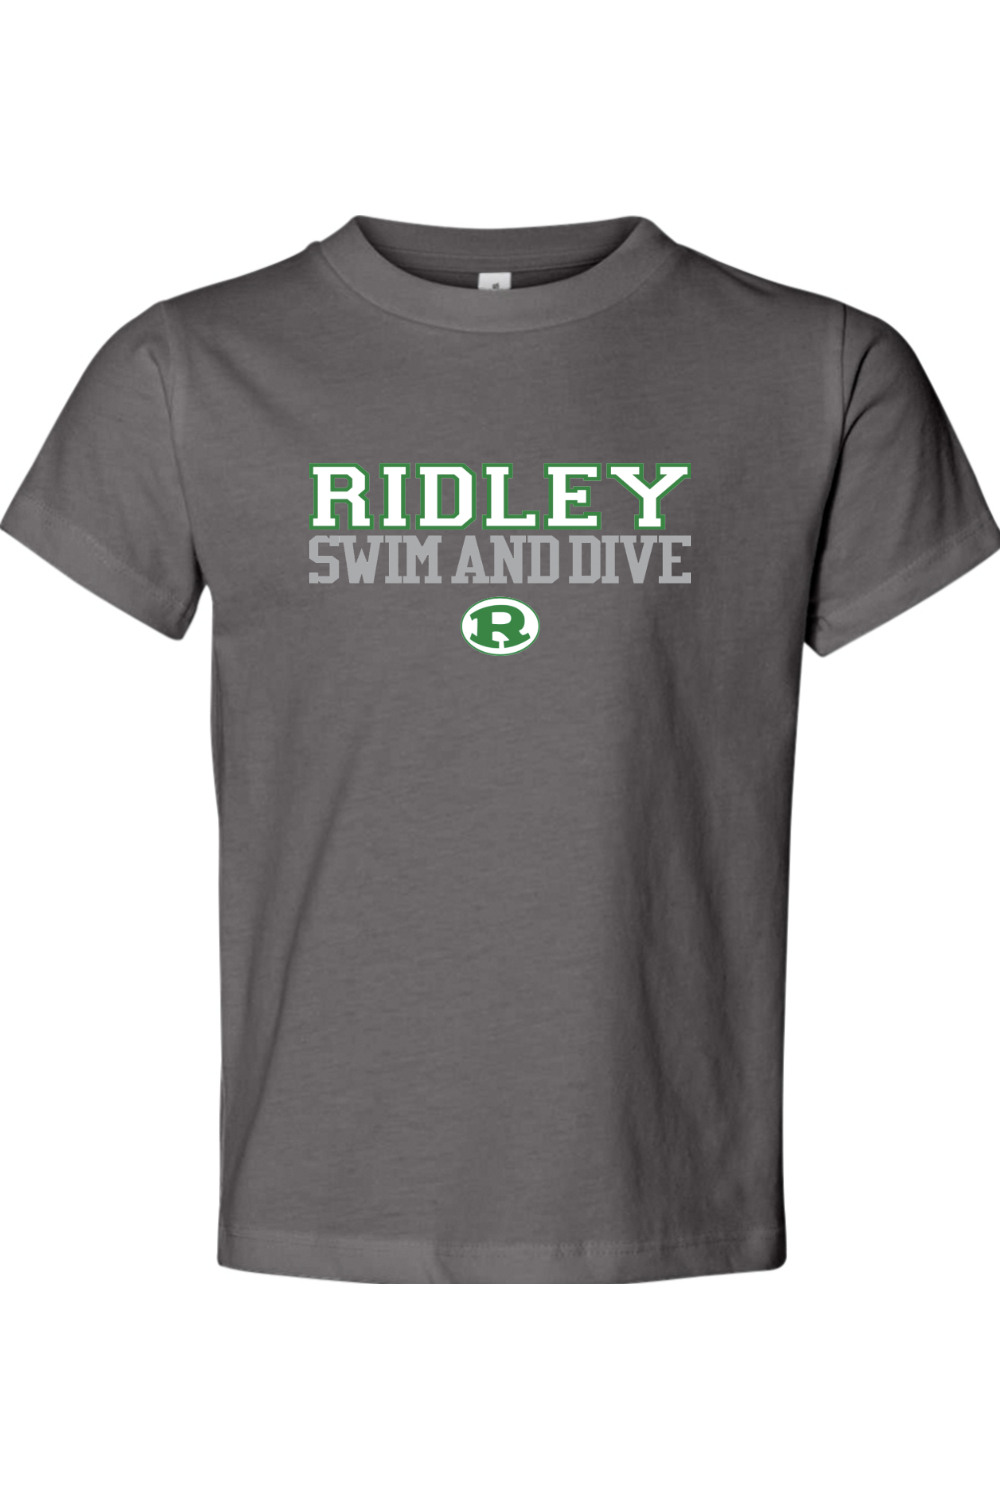 Ridley Swim and Dive Toddler Jersey Tee